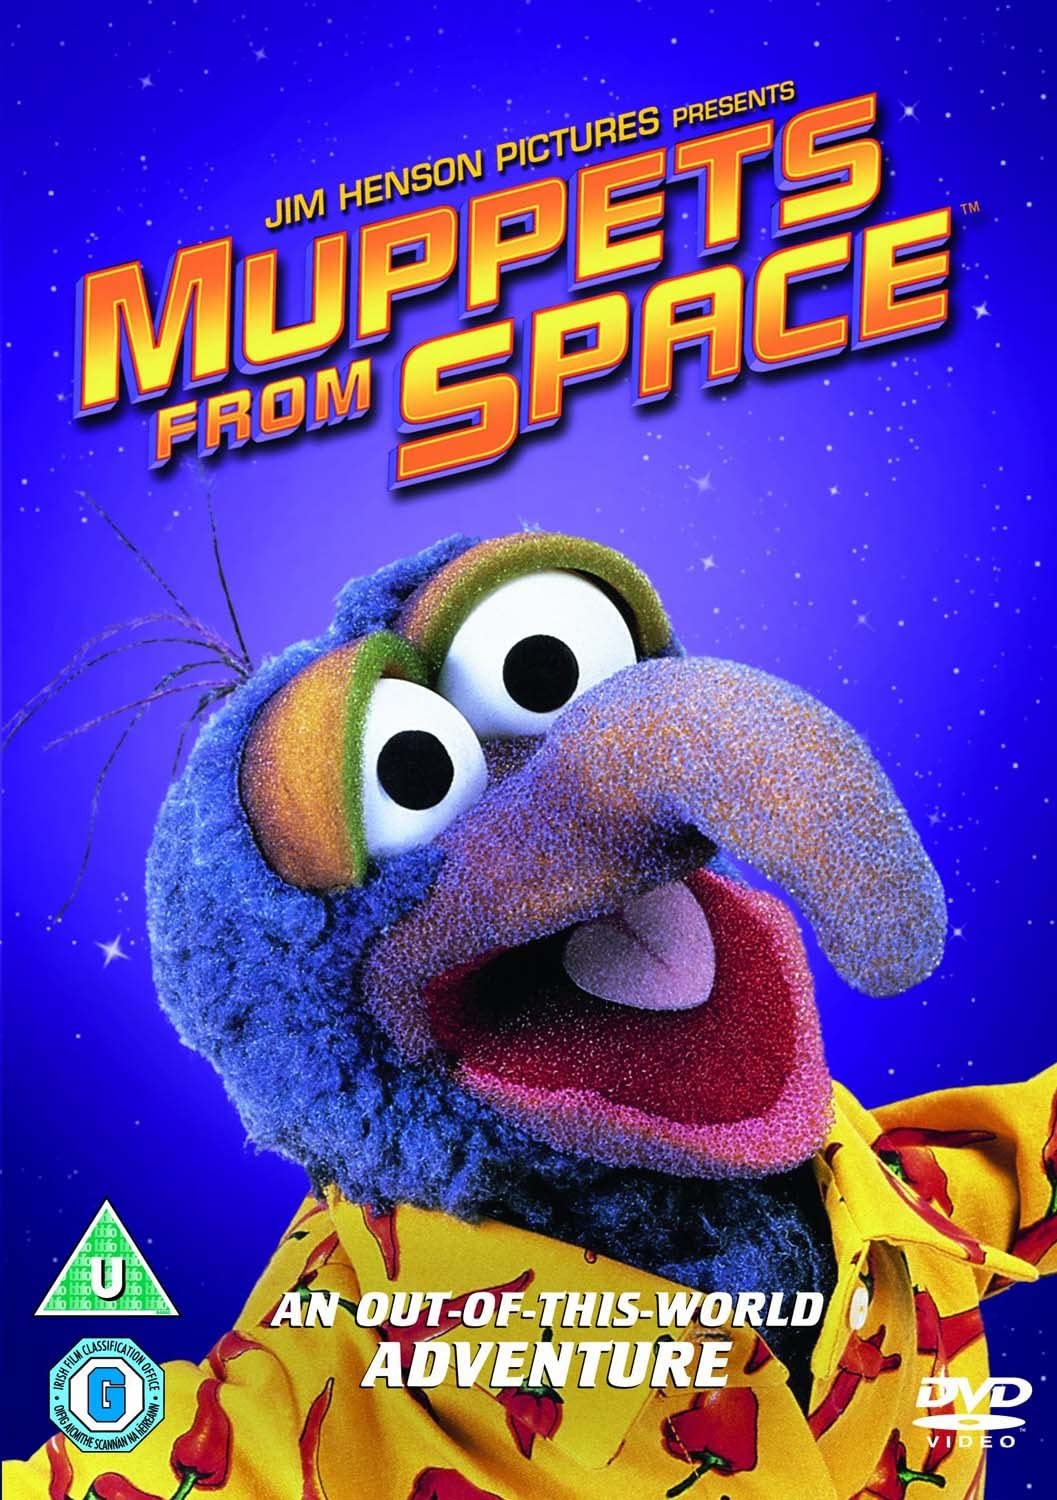 Muppets from Space - 2012 Repackage - Family/Comedy [DVD]